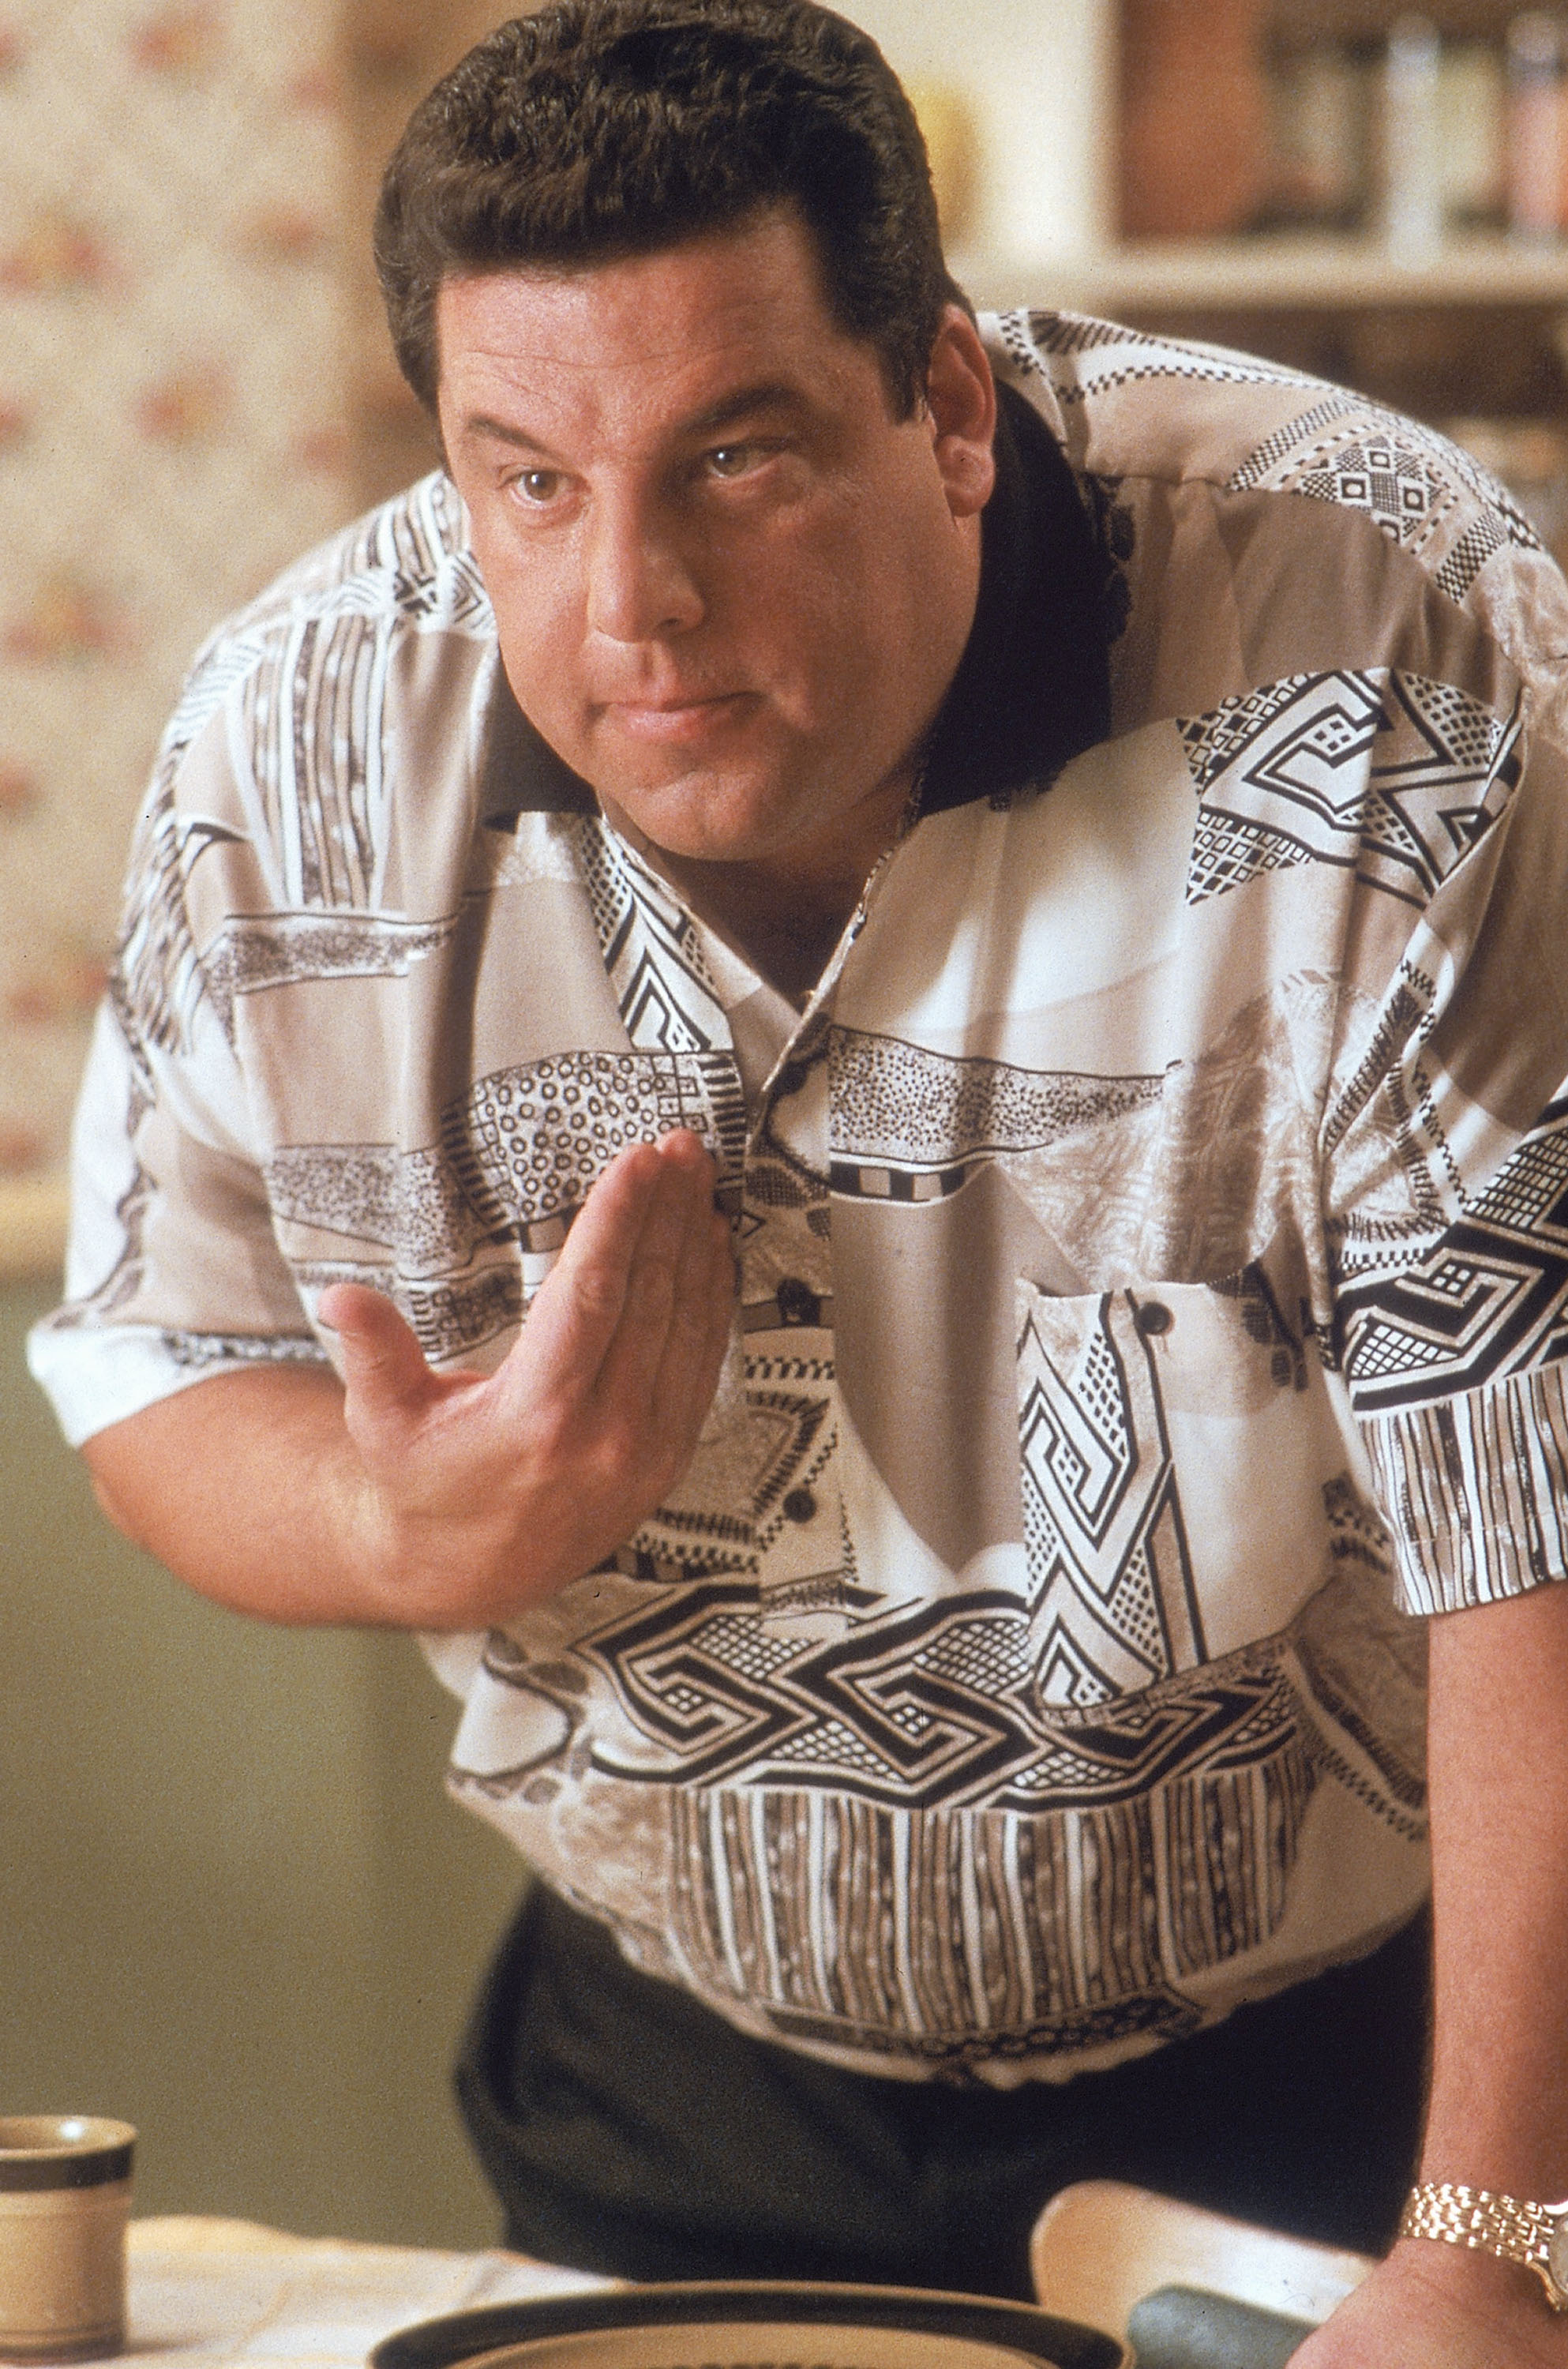 Steve Schirripa in an episode of "The Sopranos" in 2001 | Source: Getty Images